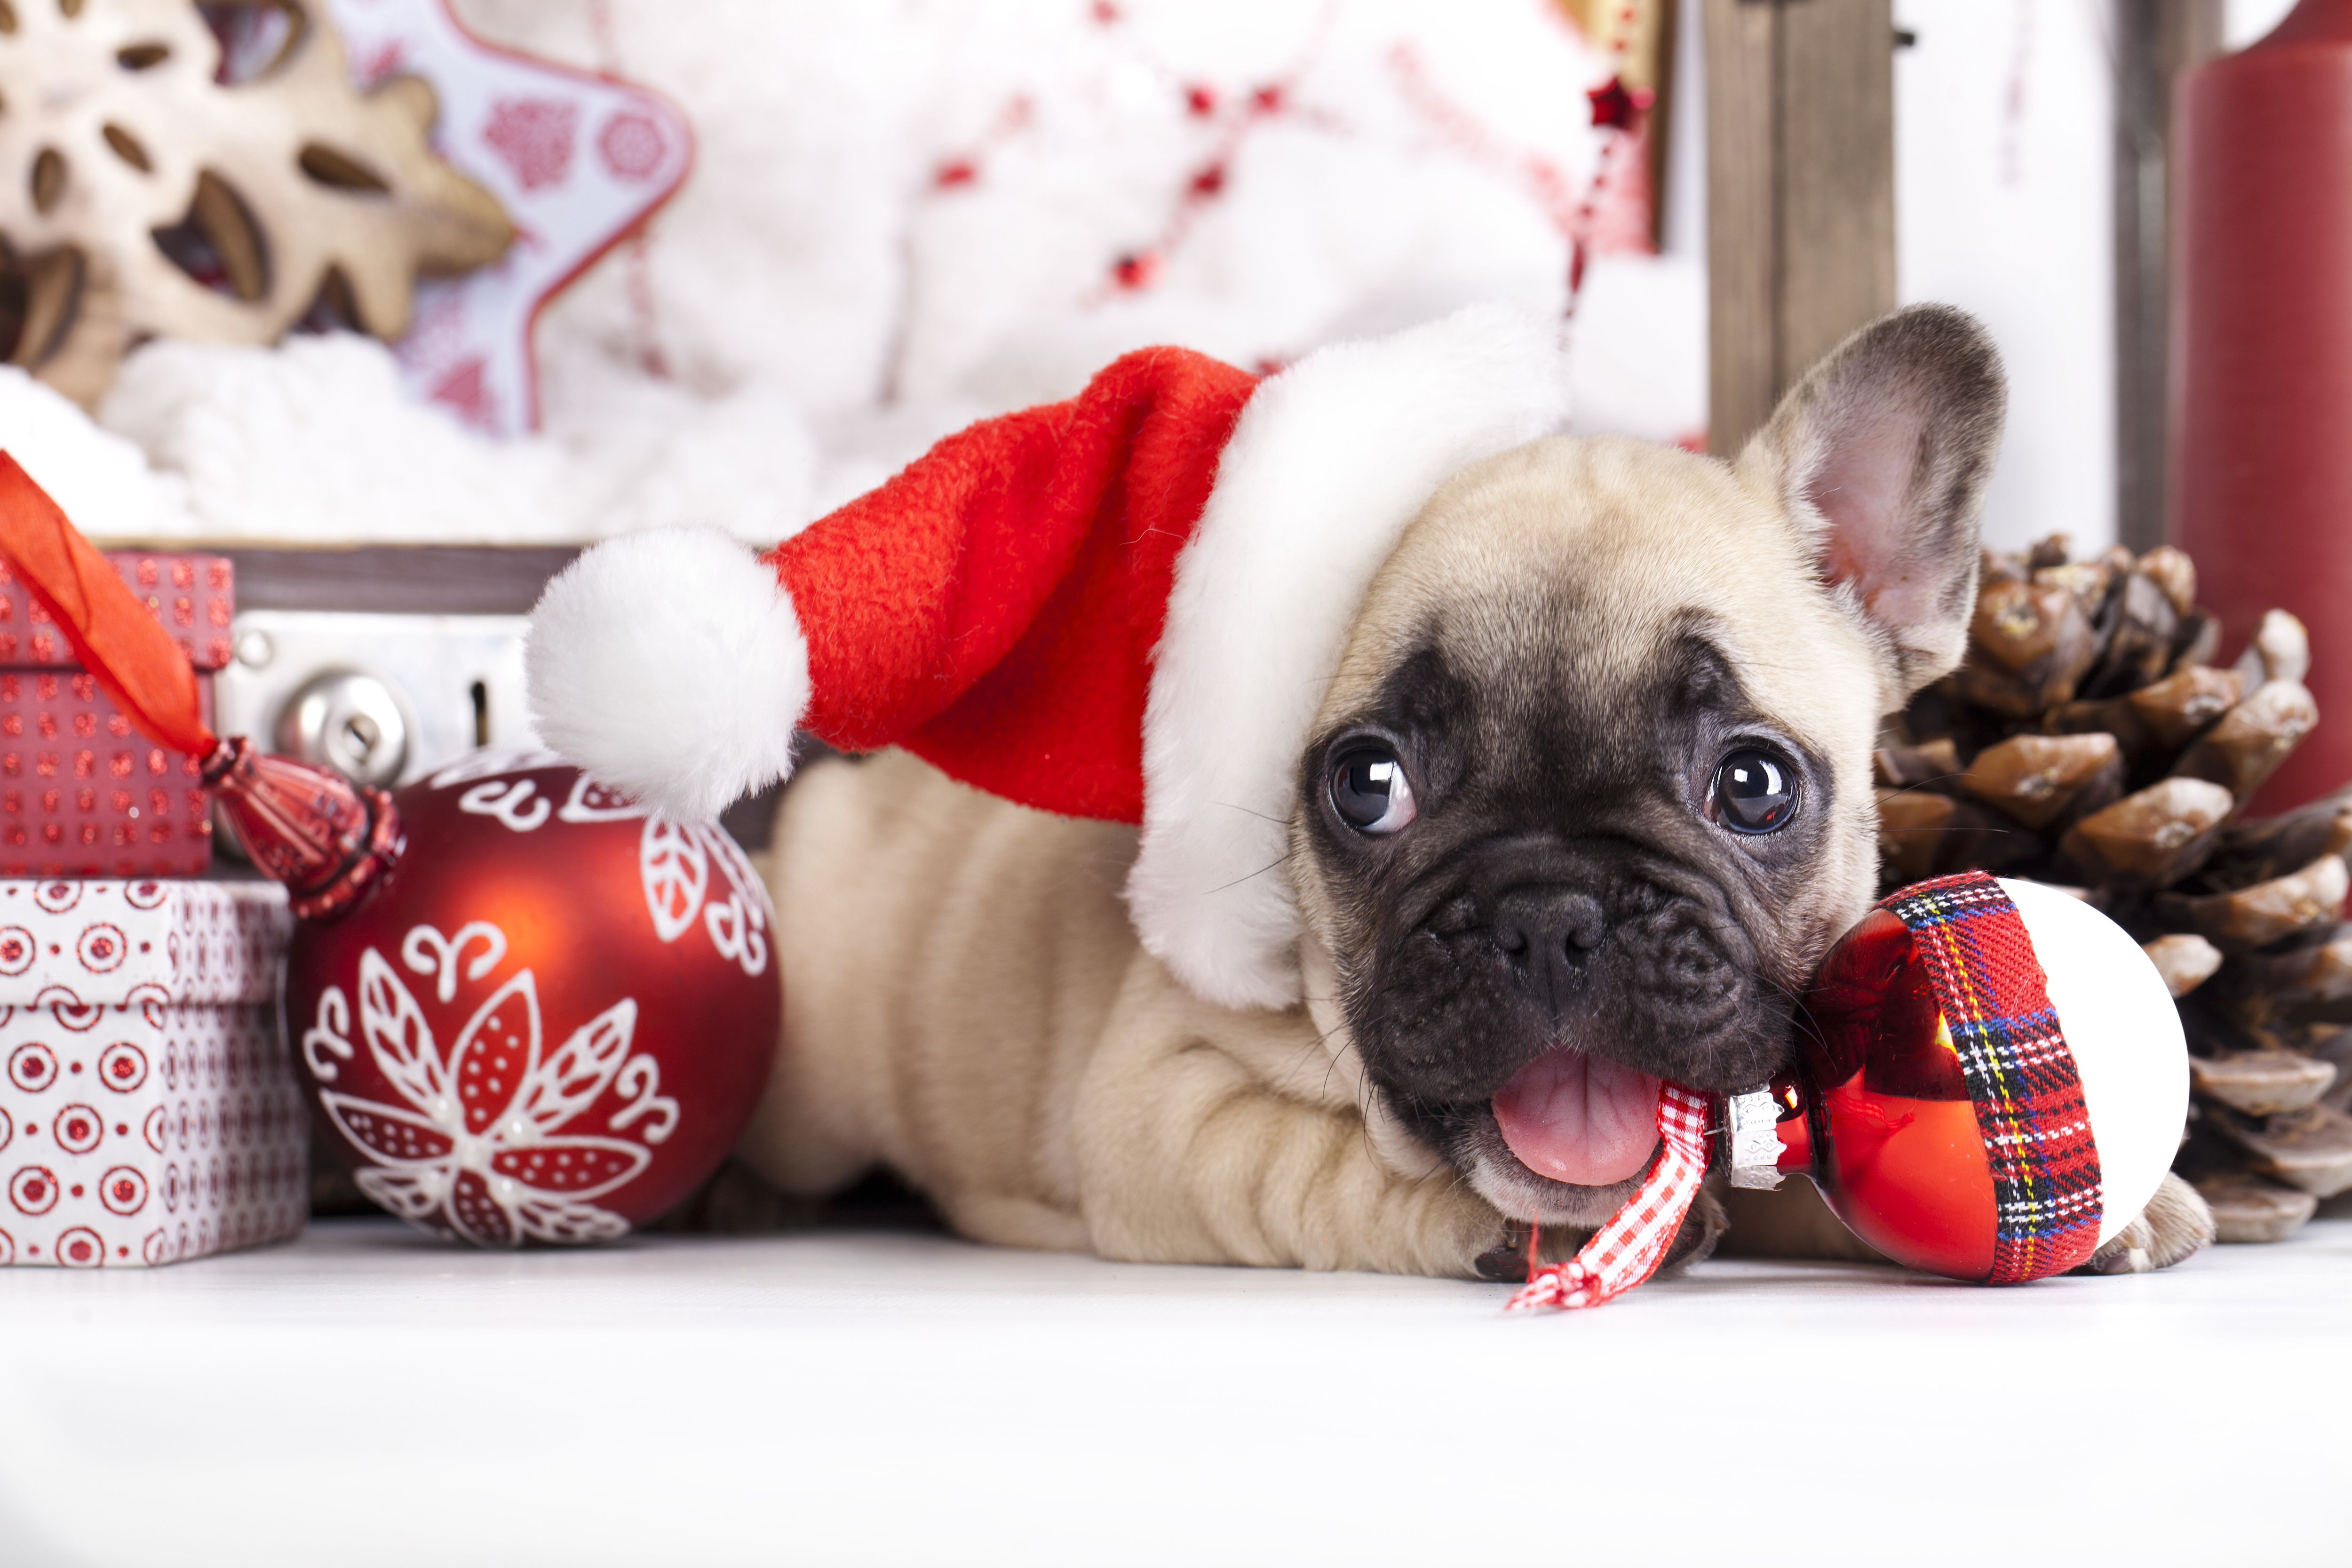 Wallpaper dog New Year Christmas puppy Santa Labrador Christmas  puppy dog New Year cute Merry santa hat images for desktop section  собаки  download